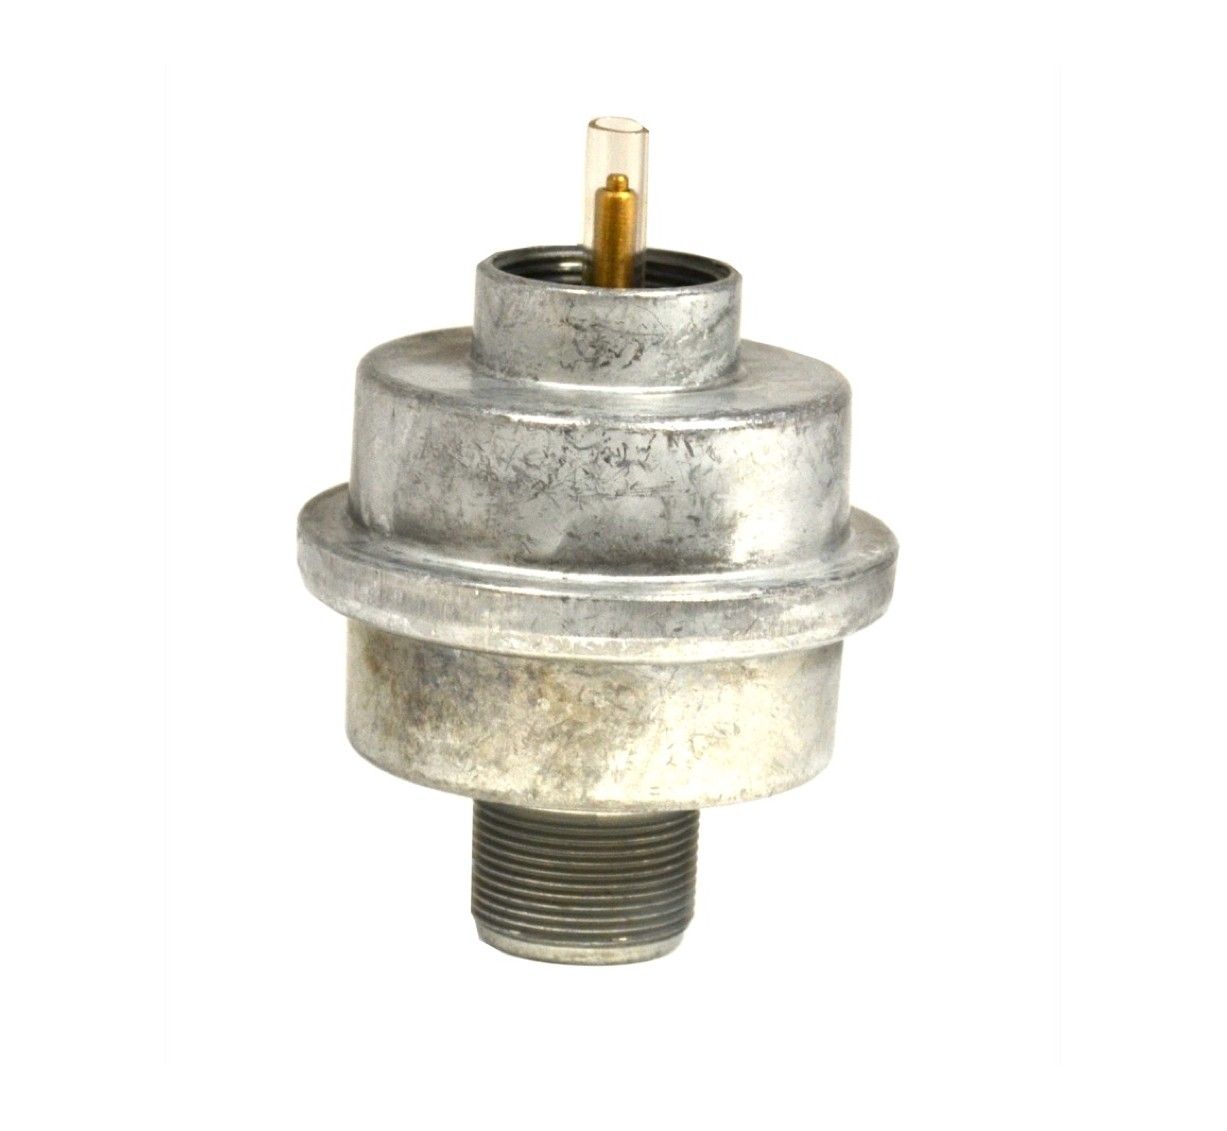 Heater Fuel Filter for Portable Big Buddy Heaters #F273699 Mr 